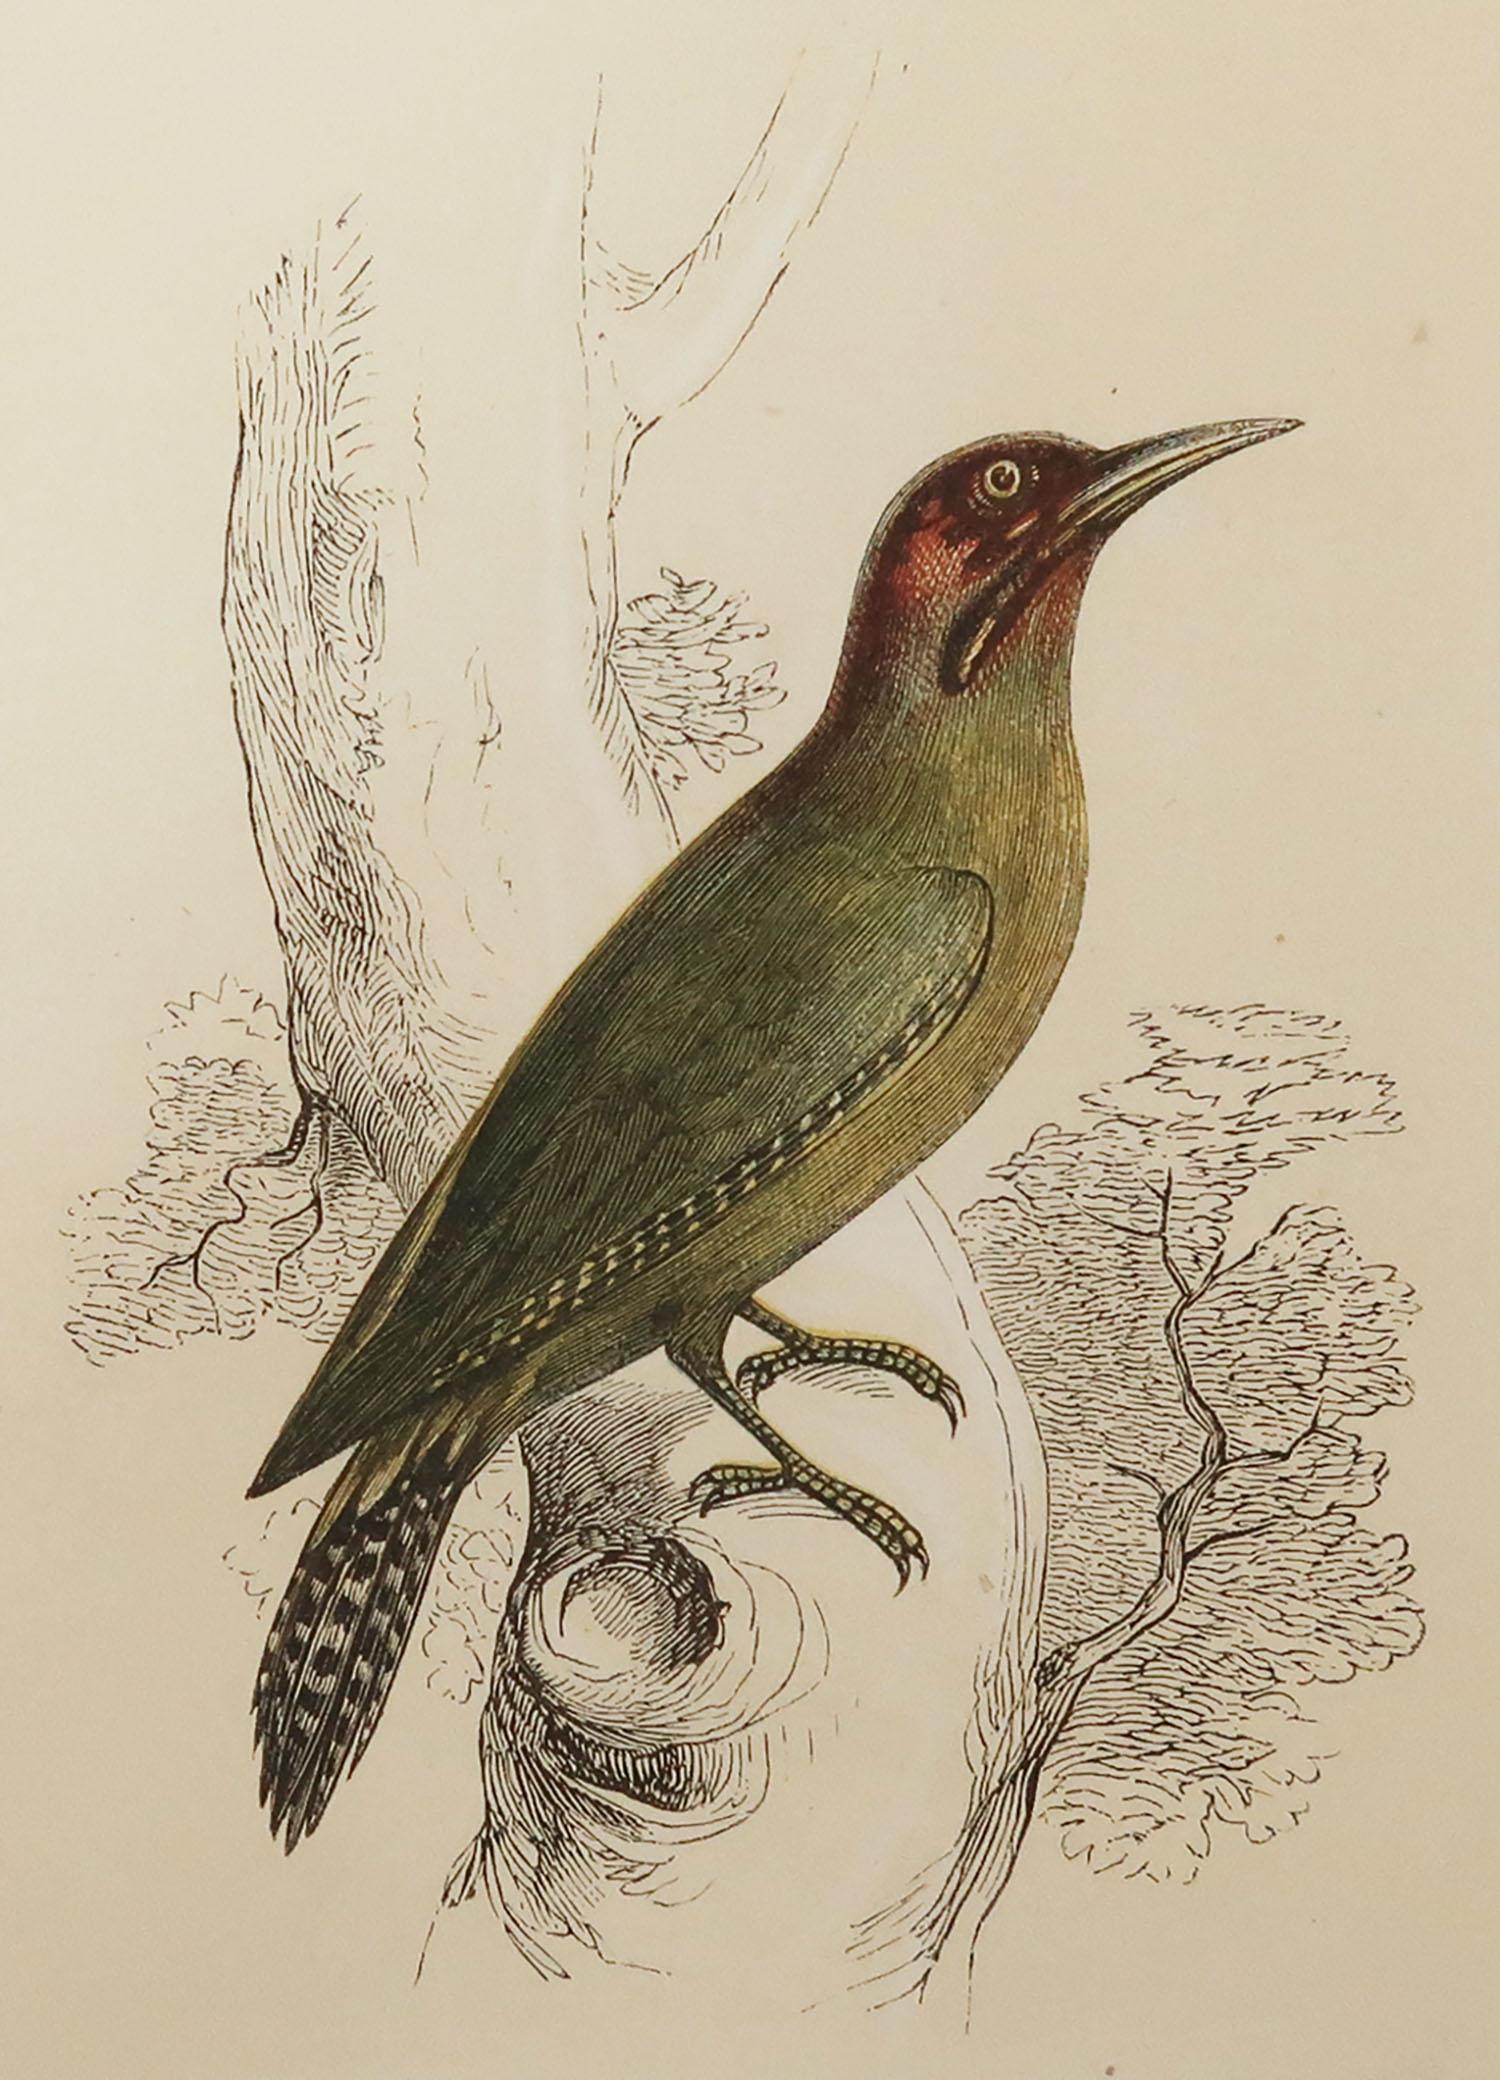 Great image of a green woodpecker

Unframed. It gives you the option of perhaps making a set up using your own choice of frames.

Lithograph with original color.

Published by Tallis, circa 1850

Crudely inscribed title has been erased at